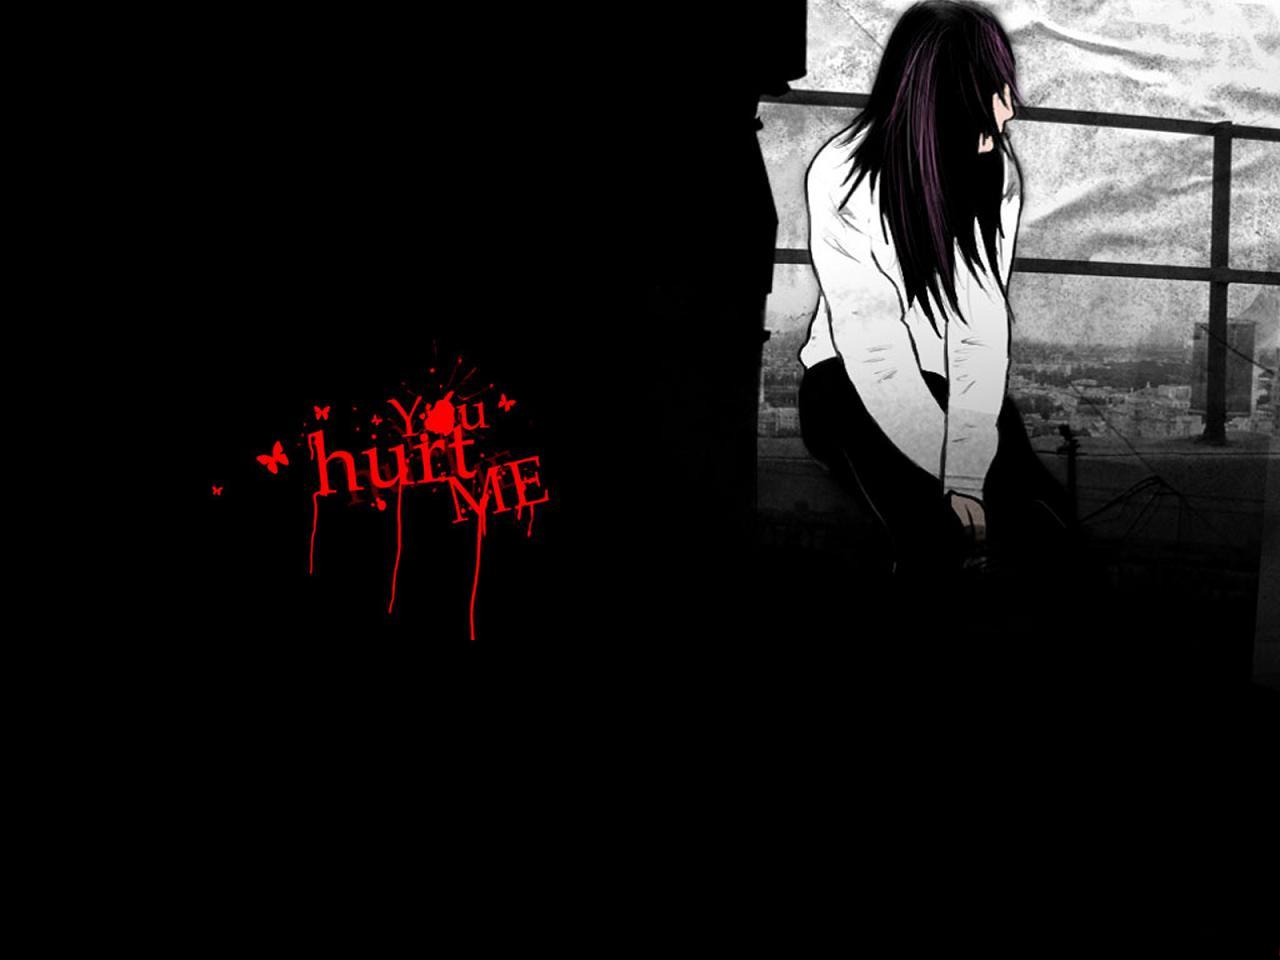 Here Is Sad Emo Girl In Love Wallpaper And Photos Gallery